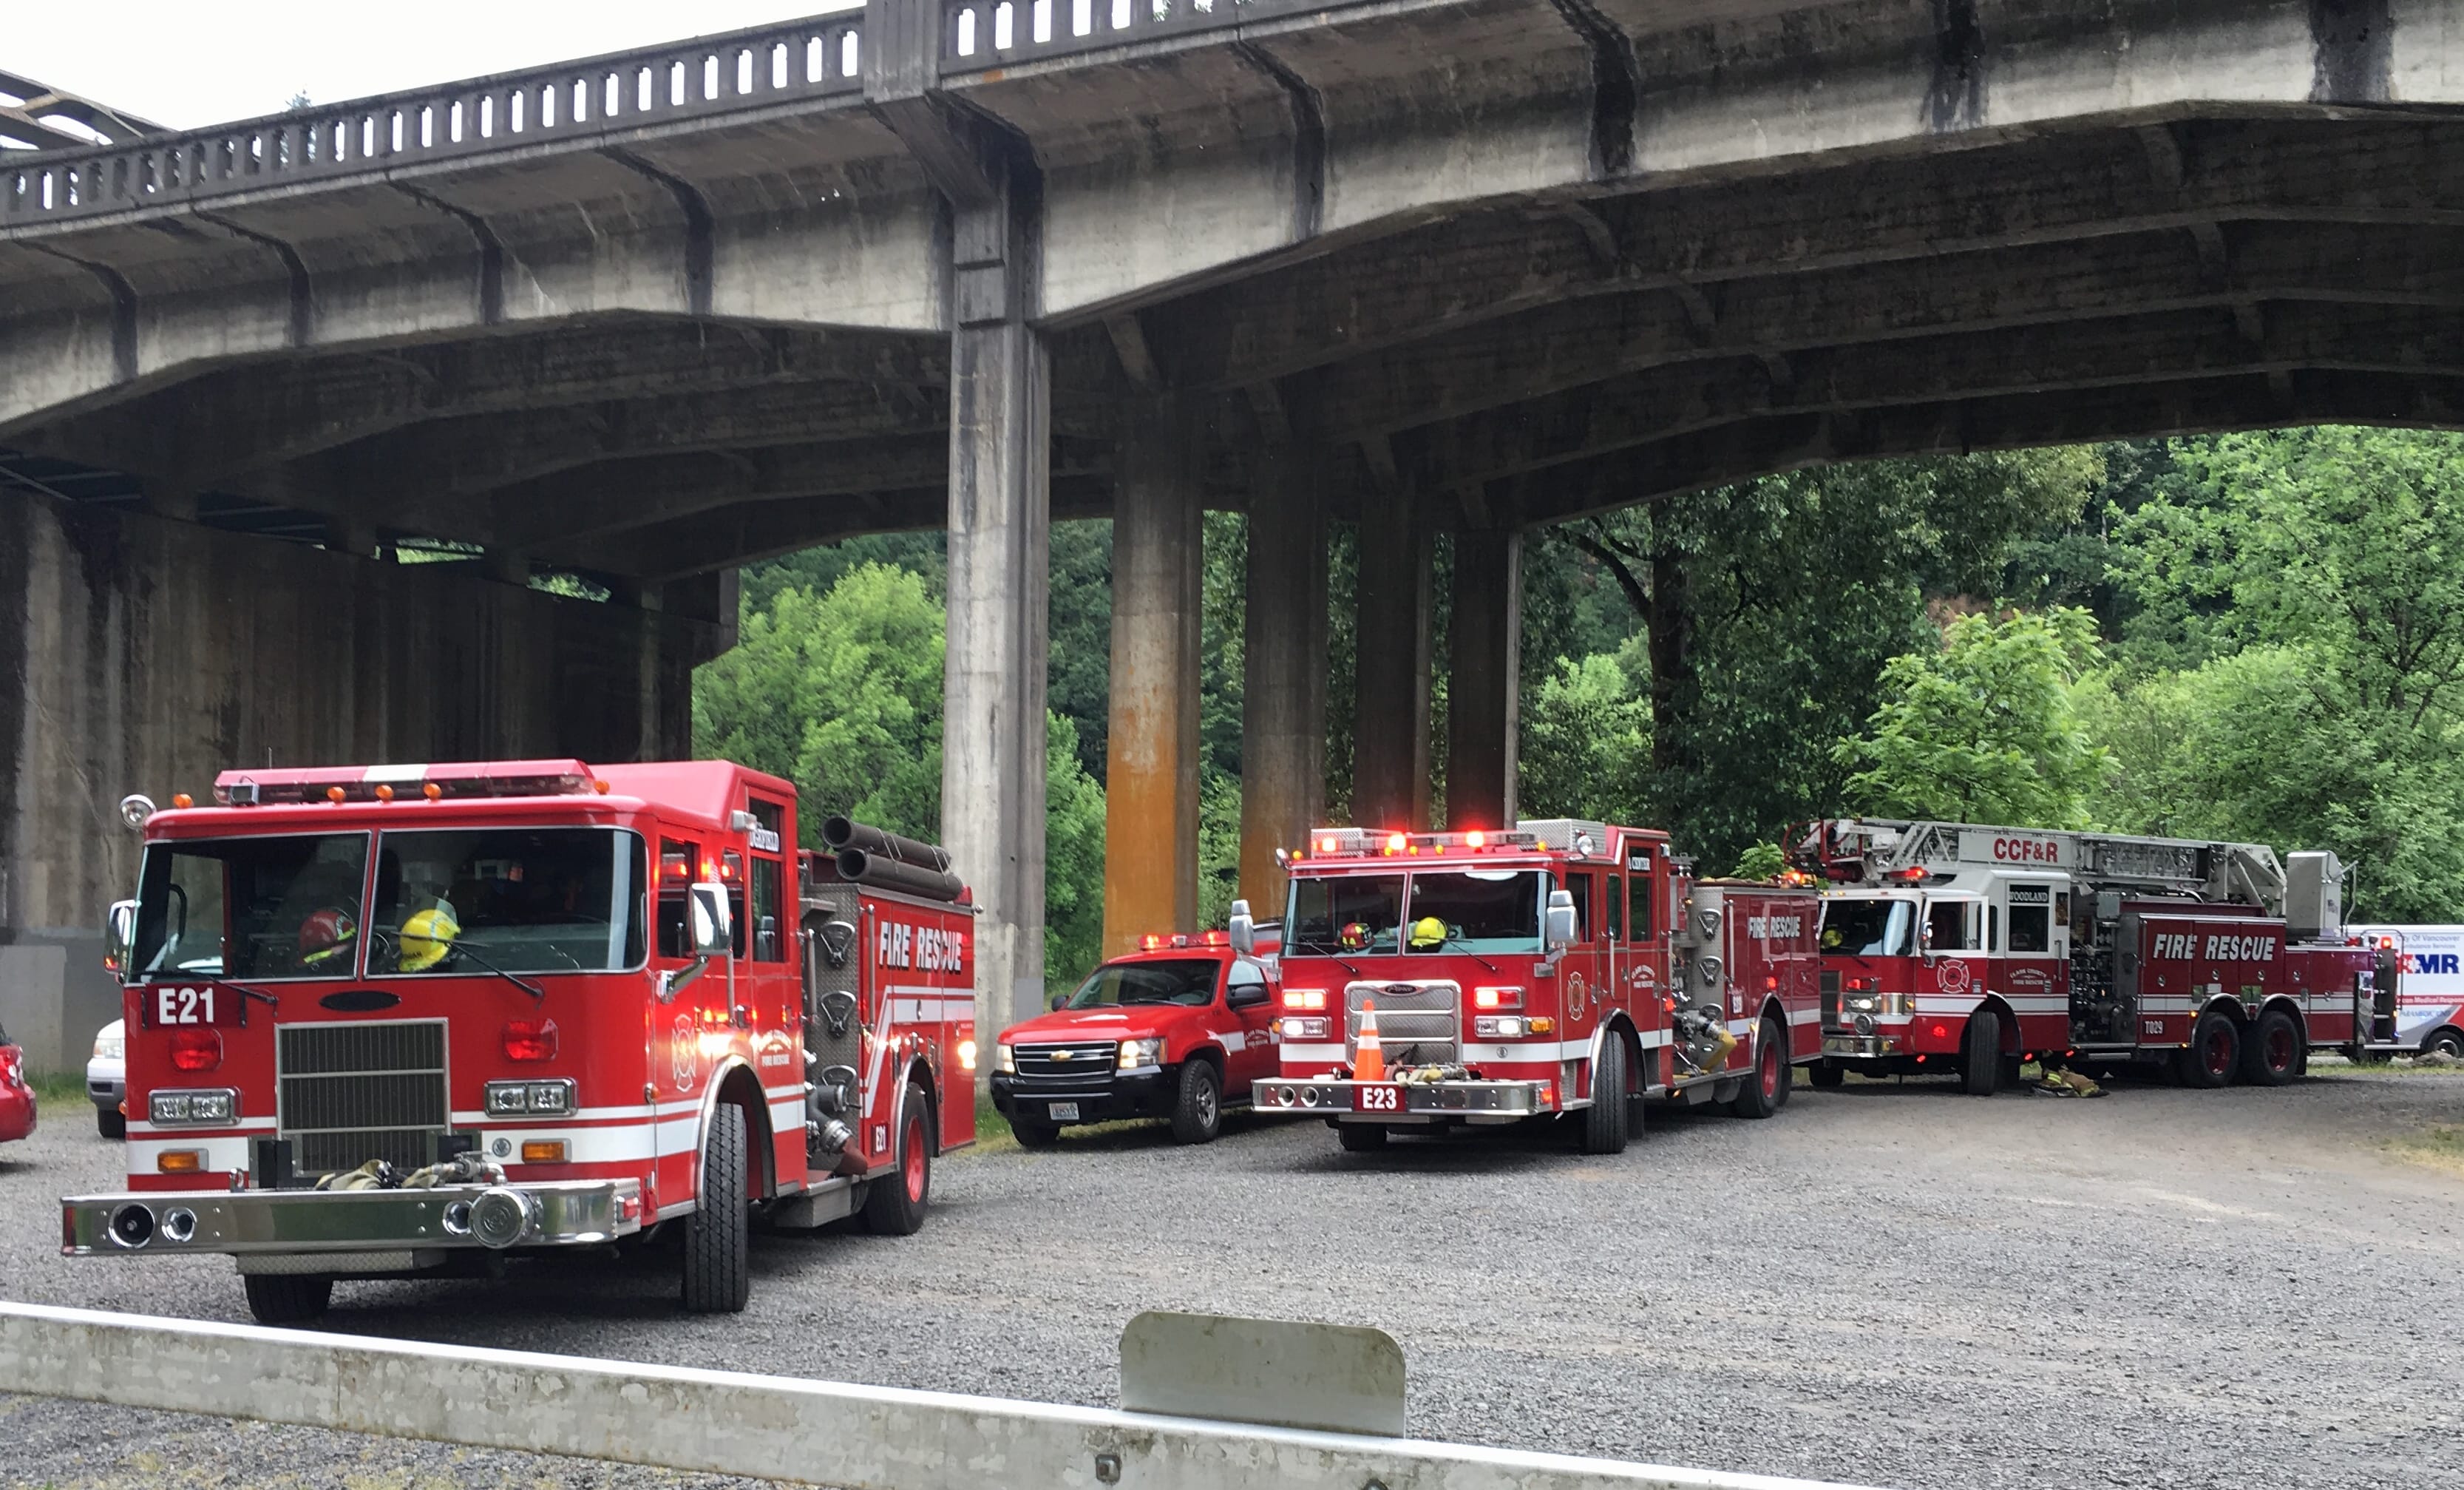 Deputies and fire crews respond to a reported drowning at Paradise Point State Park Tuesday evening. Rescue teams were unable to locate a swimmer in distress spotted in the river that afternoon, and he was presumed drowned.